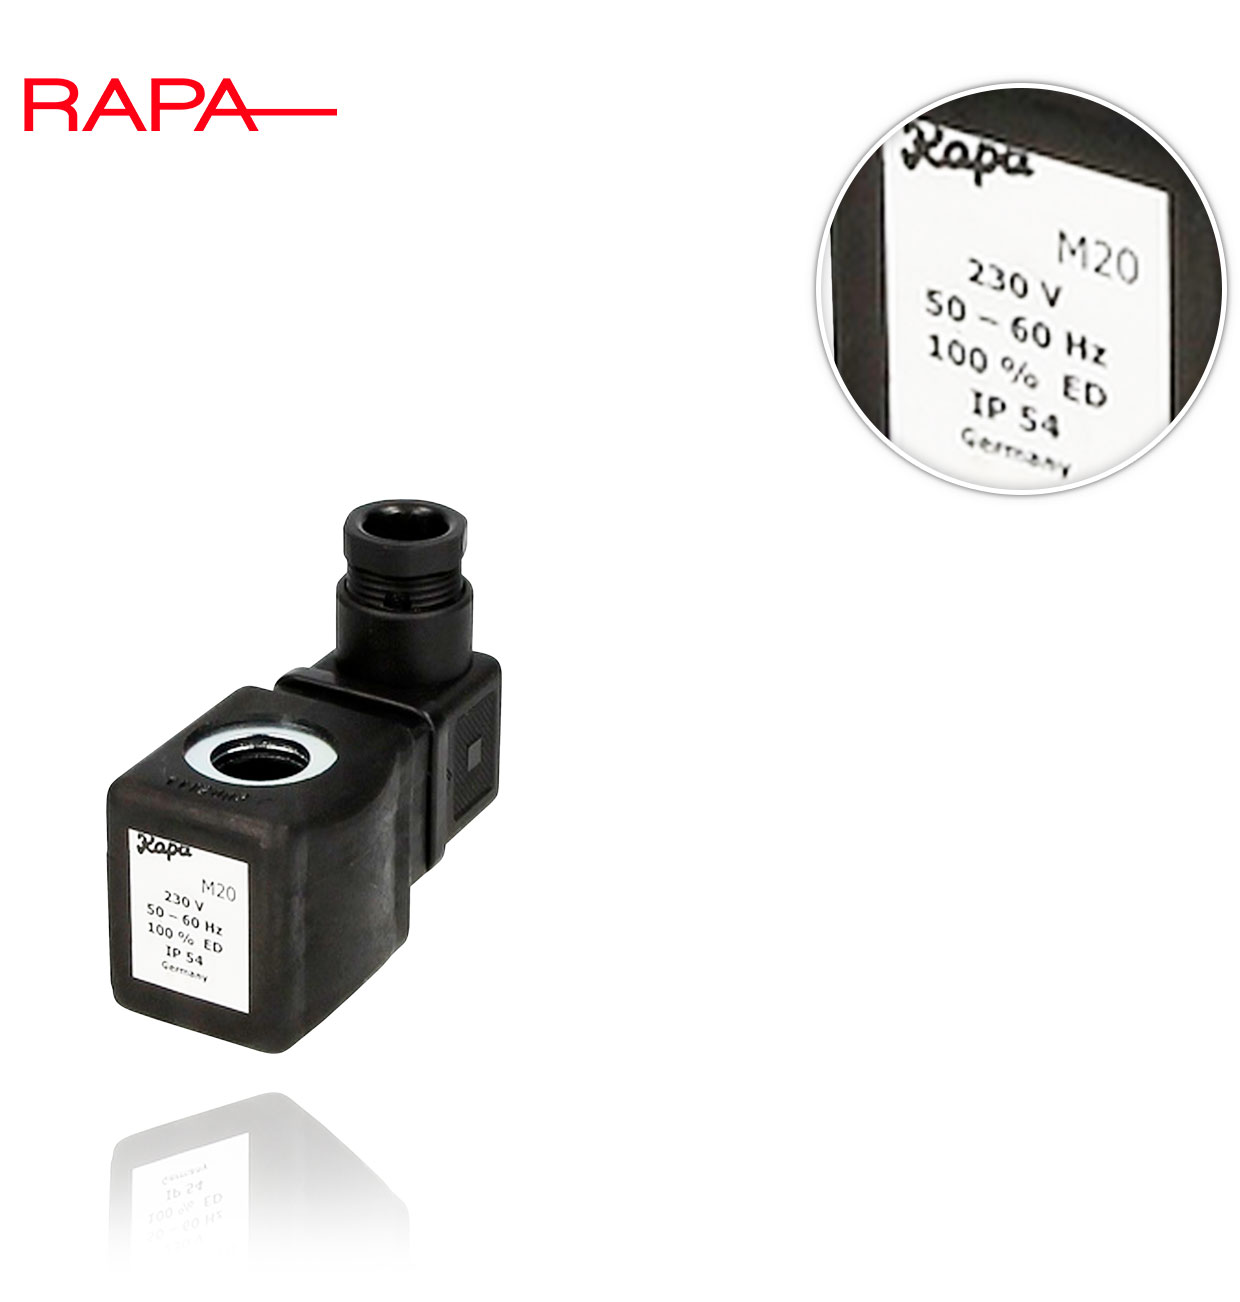 M20 14W 230V/50Hz with RAPA COIL connector